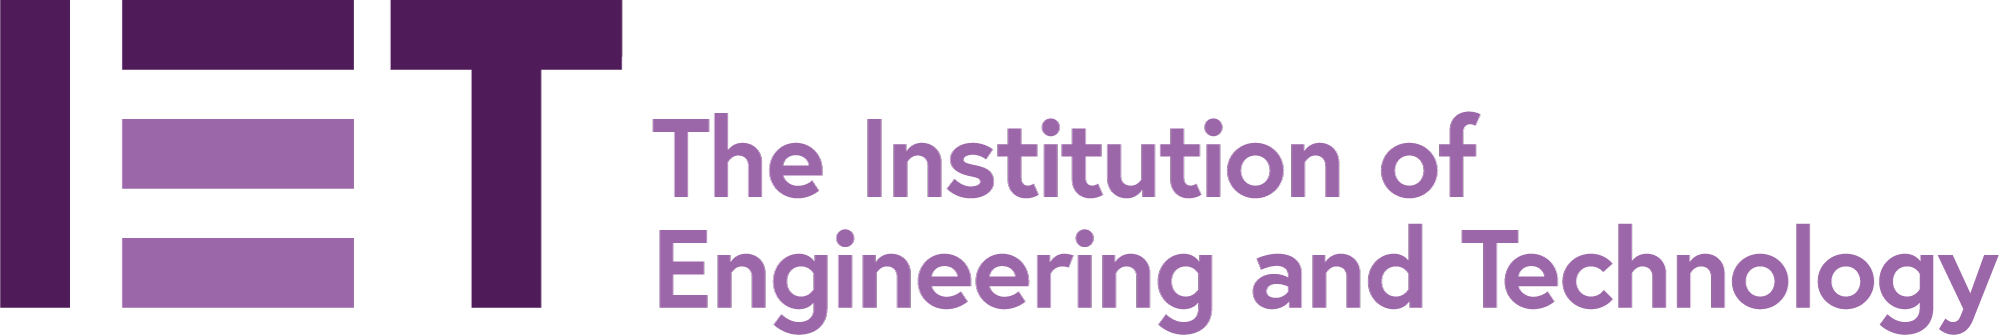 The Institution for Engineering & Technology (IET) Logo